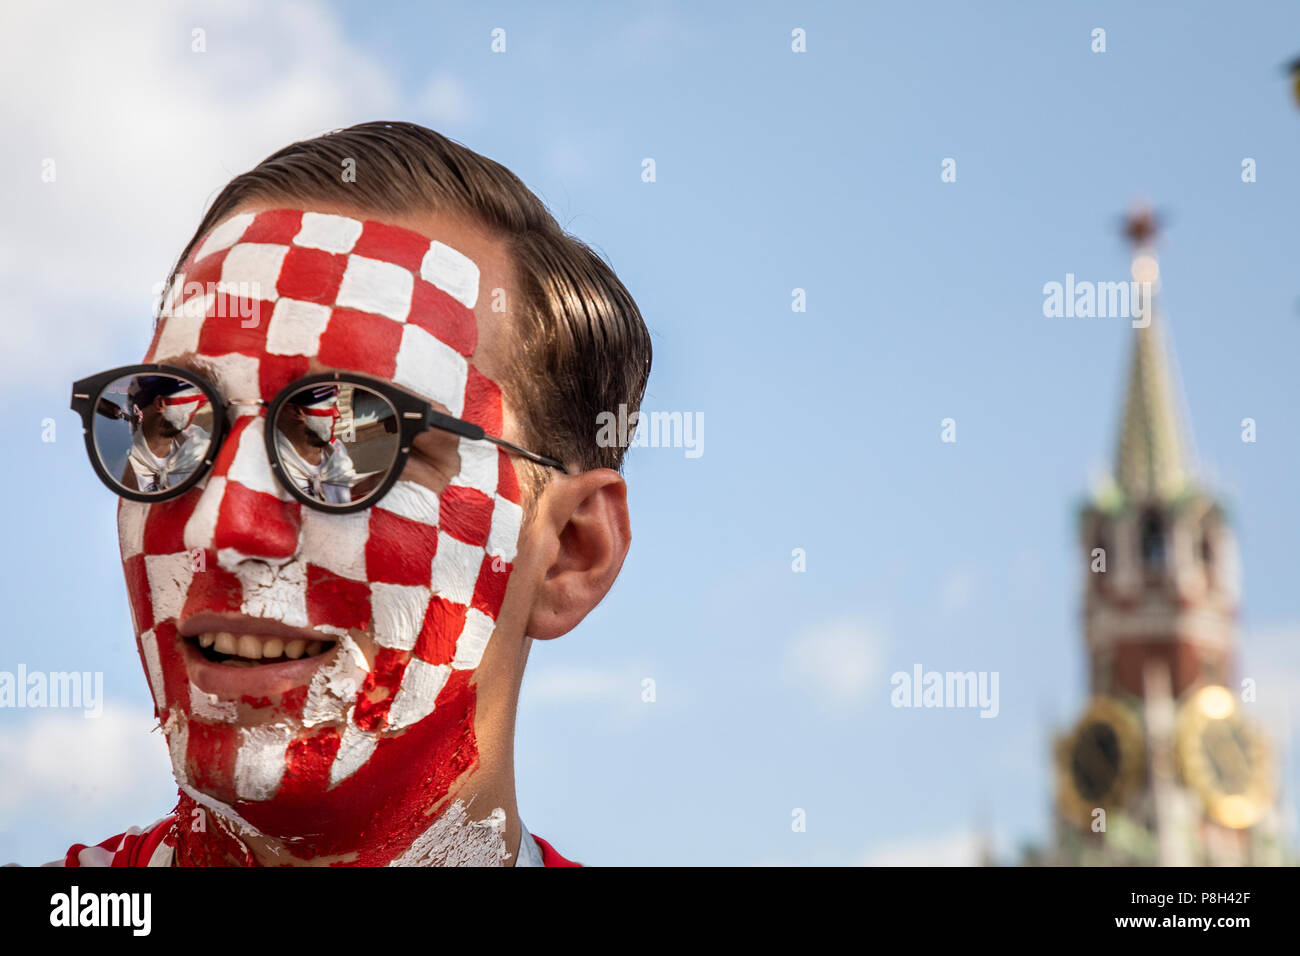 Moscow, Russia. 11th July, 2018. English and Croatian football fan cheer on the Red Square in Moscow during the World Cup FIFA 2018 Russia Credit: Nikolay Vinokurov/Alamy Live News Stock Photo